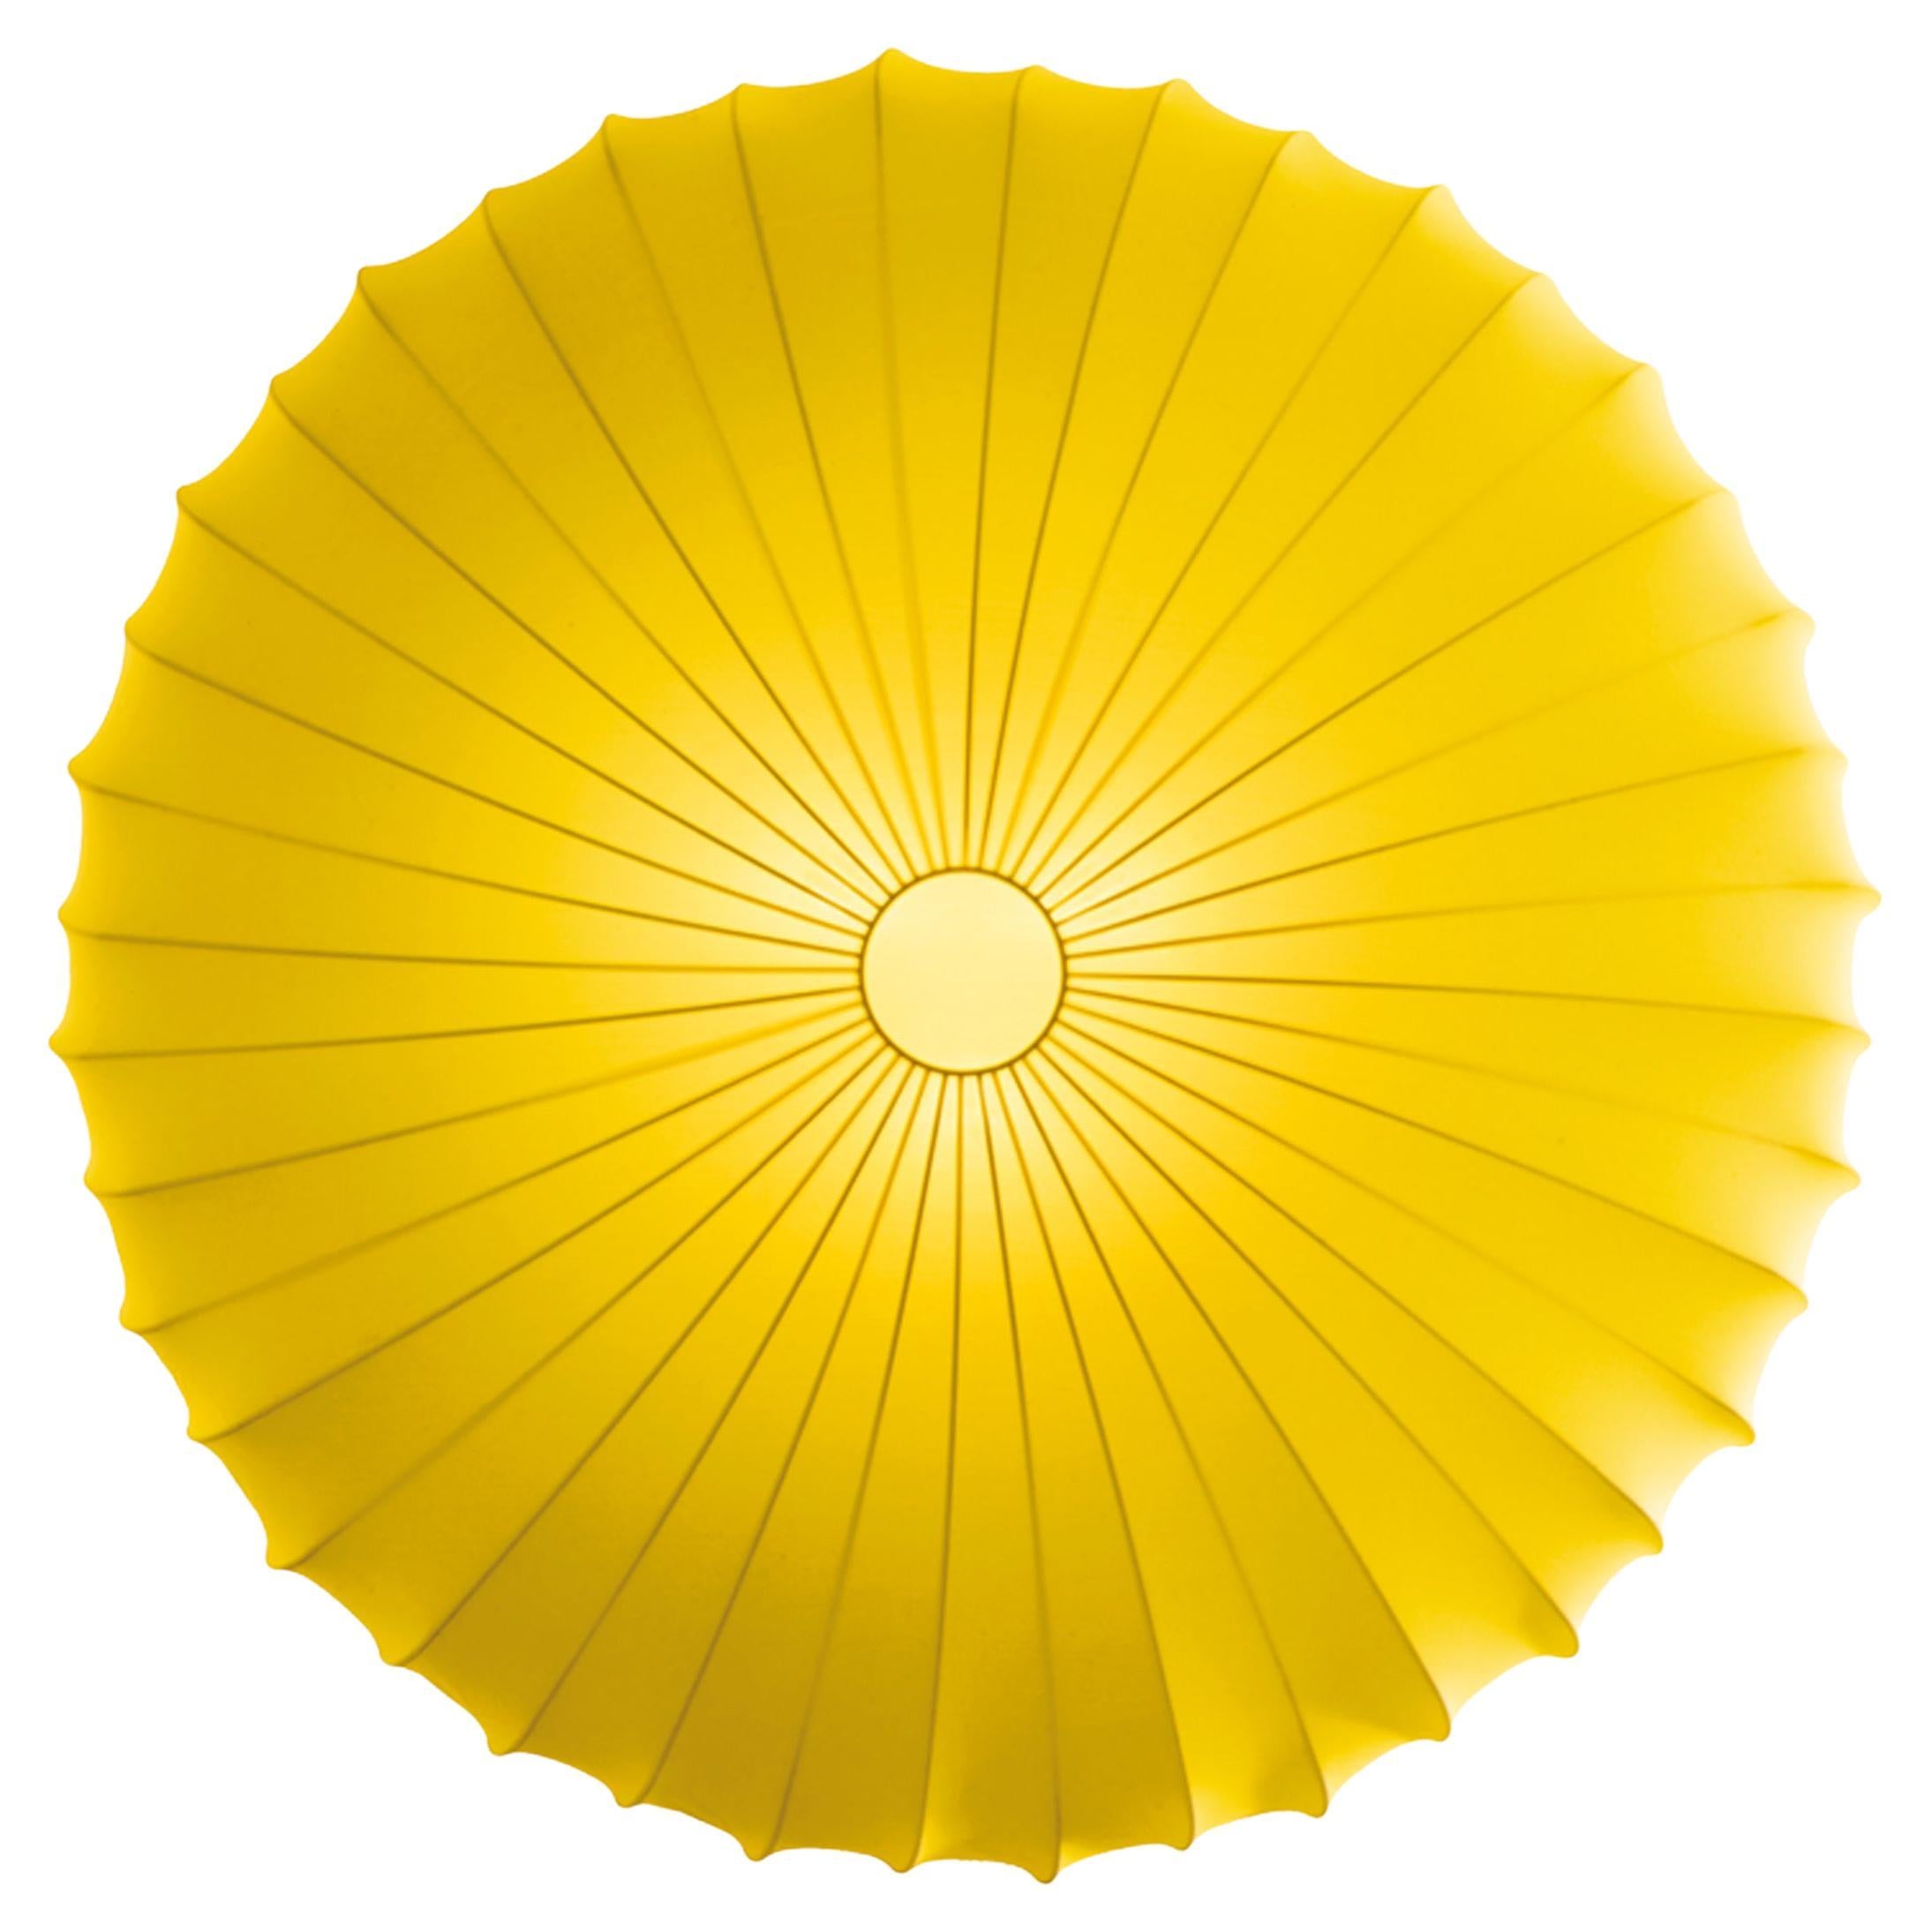 Axolight Muse Large Ceiling Light in Yellow with White Metal Finish